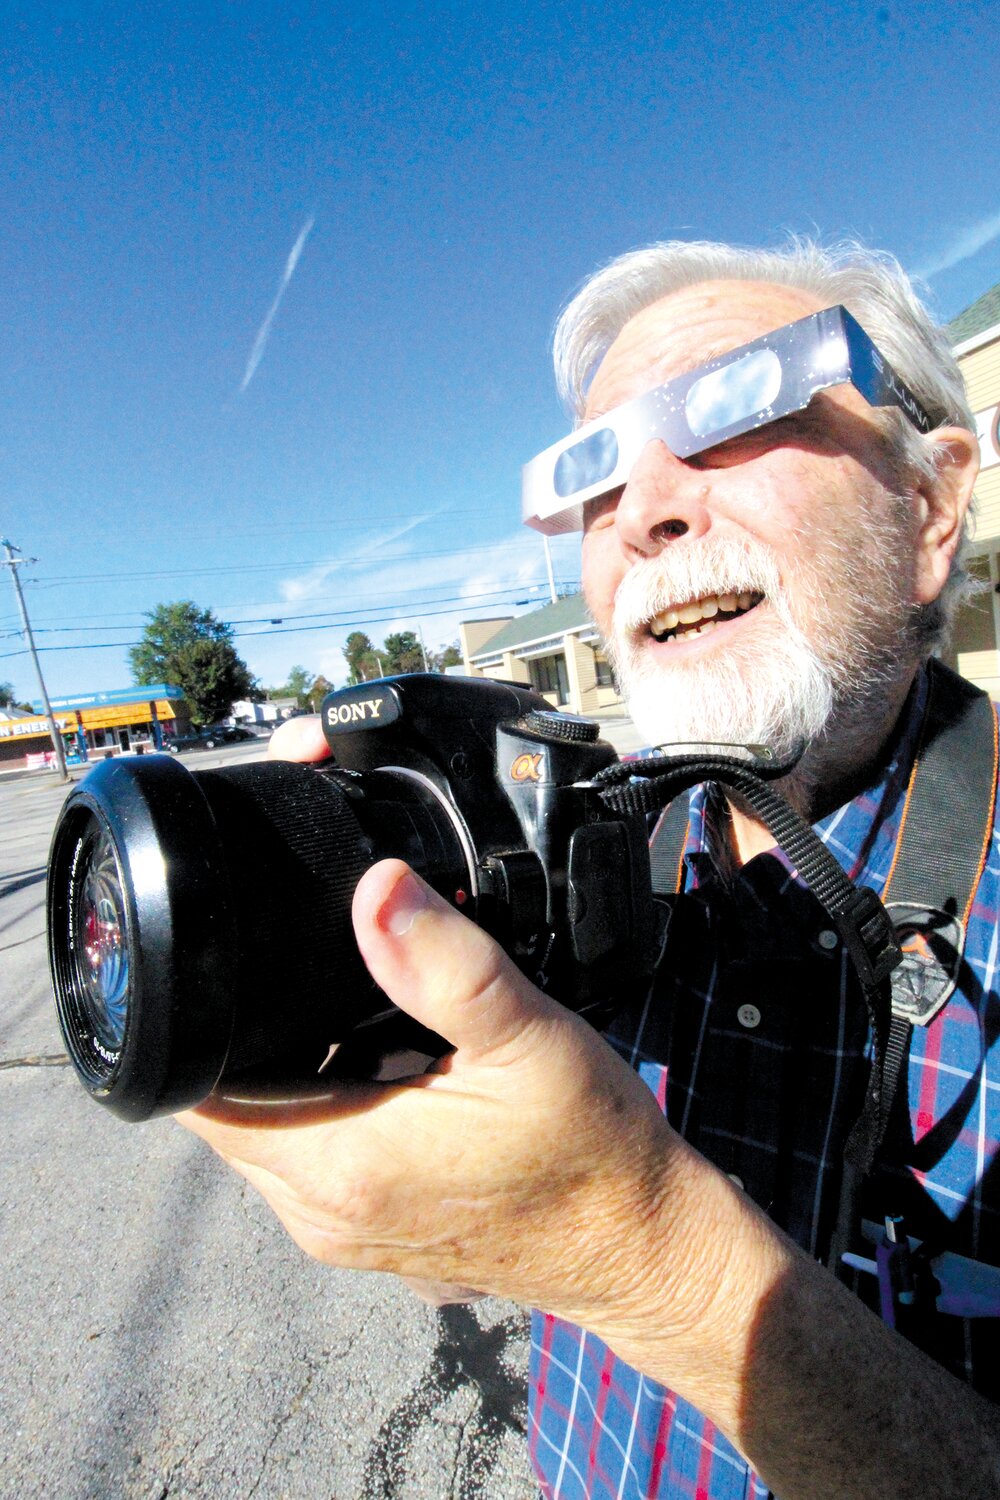 PREPARED TO SHOOT: Cranston Herald photographer Steve Popiel is armed with camera and eclipse-safe glasses to record the partial solar eclipse this Saturday.